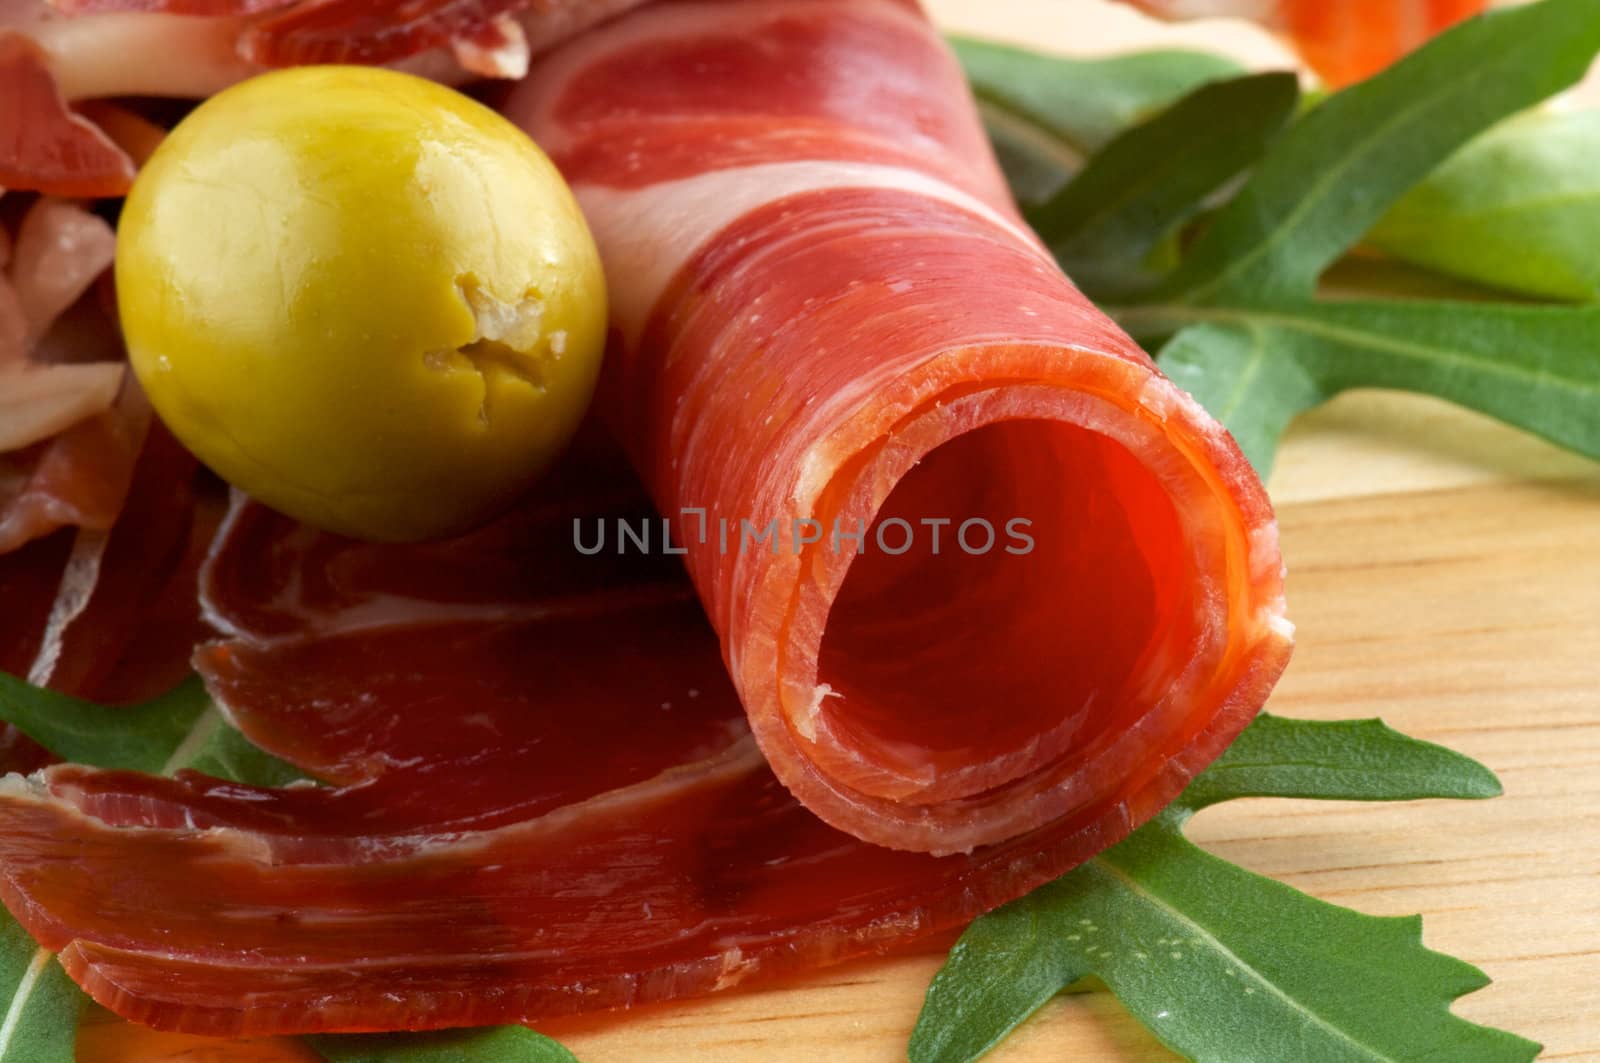 Slices of jamon and olives by zhekos